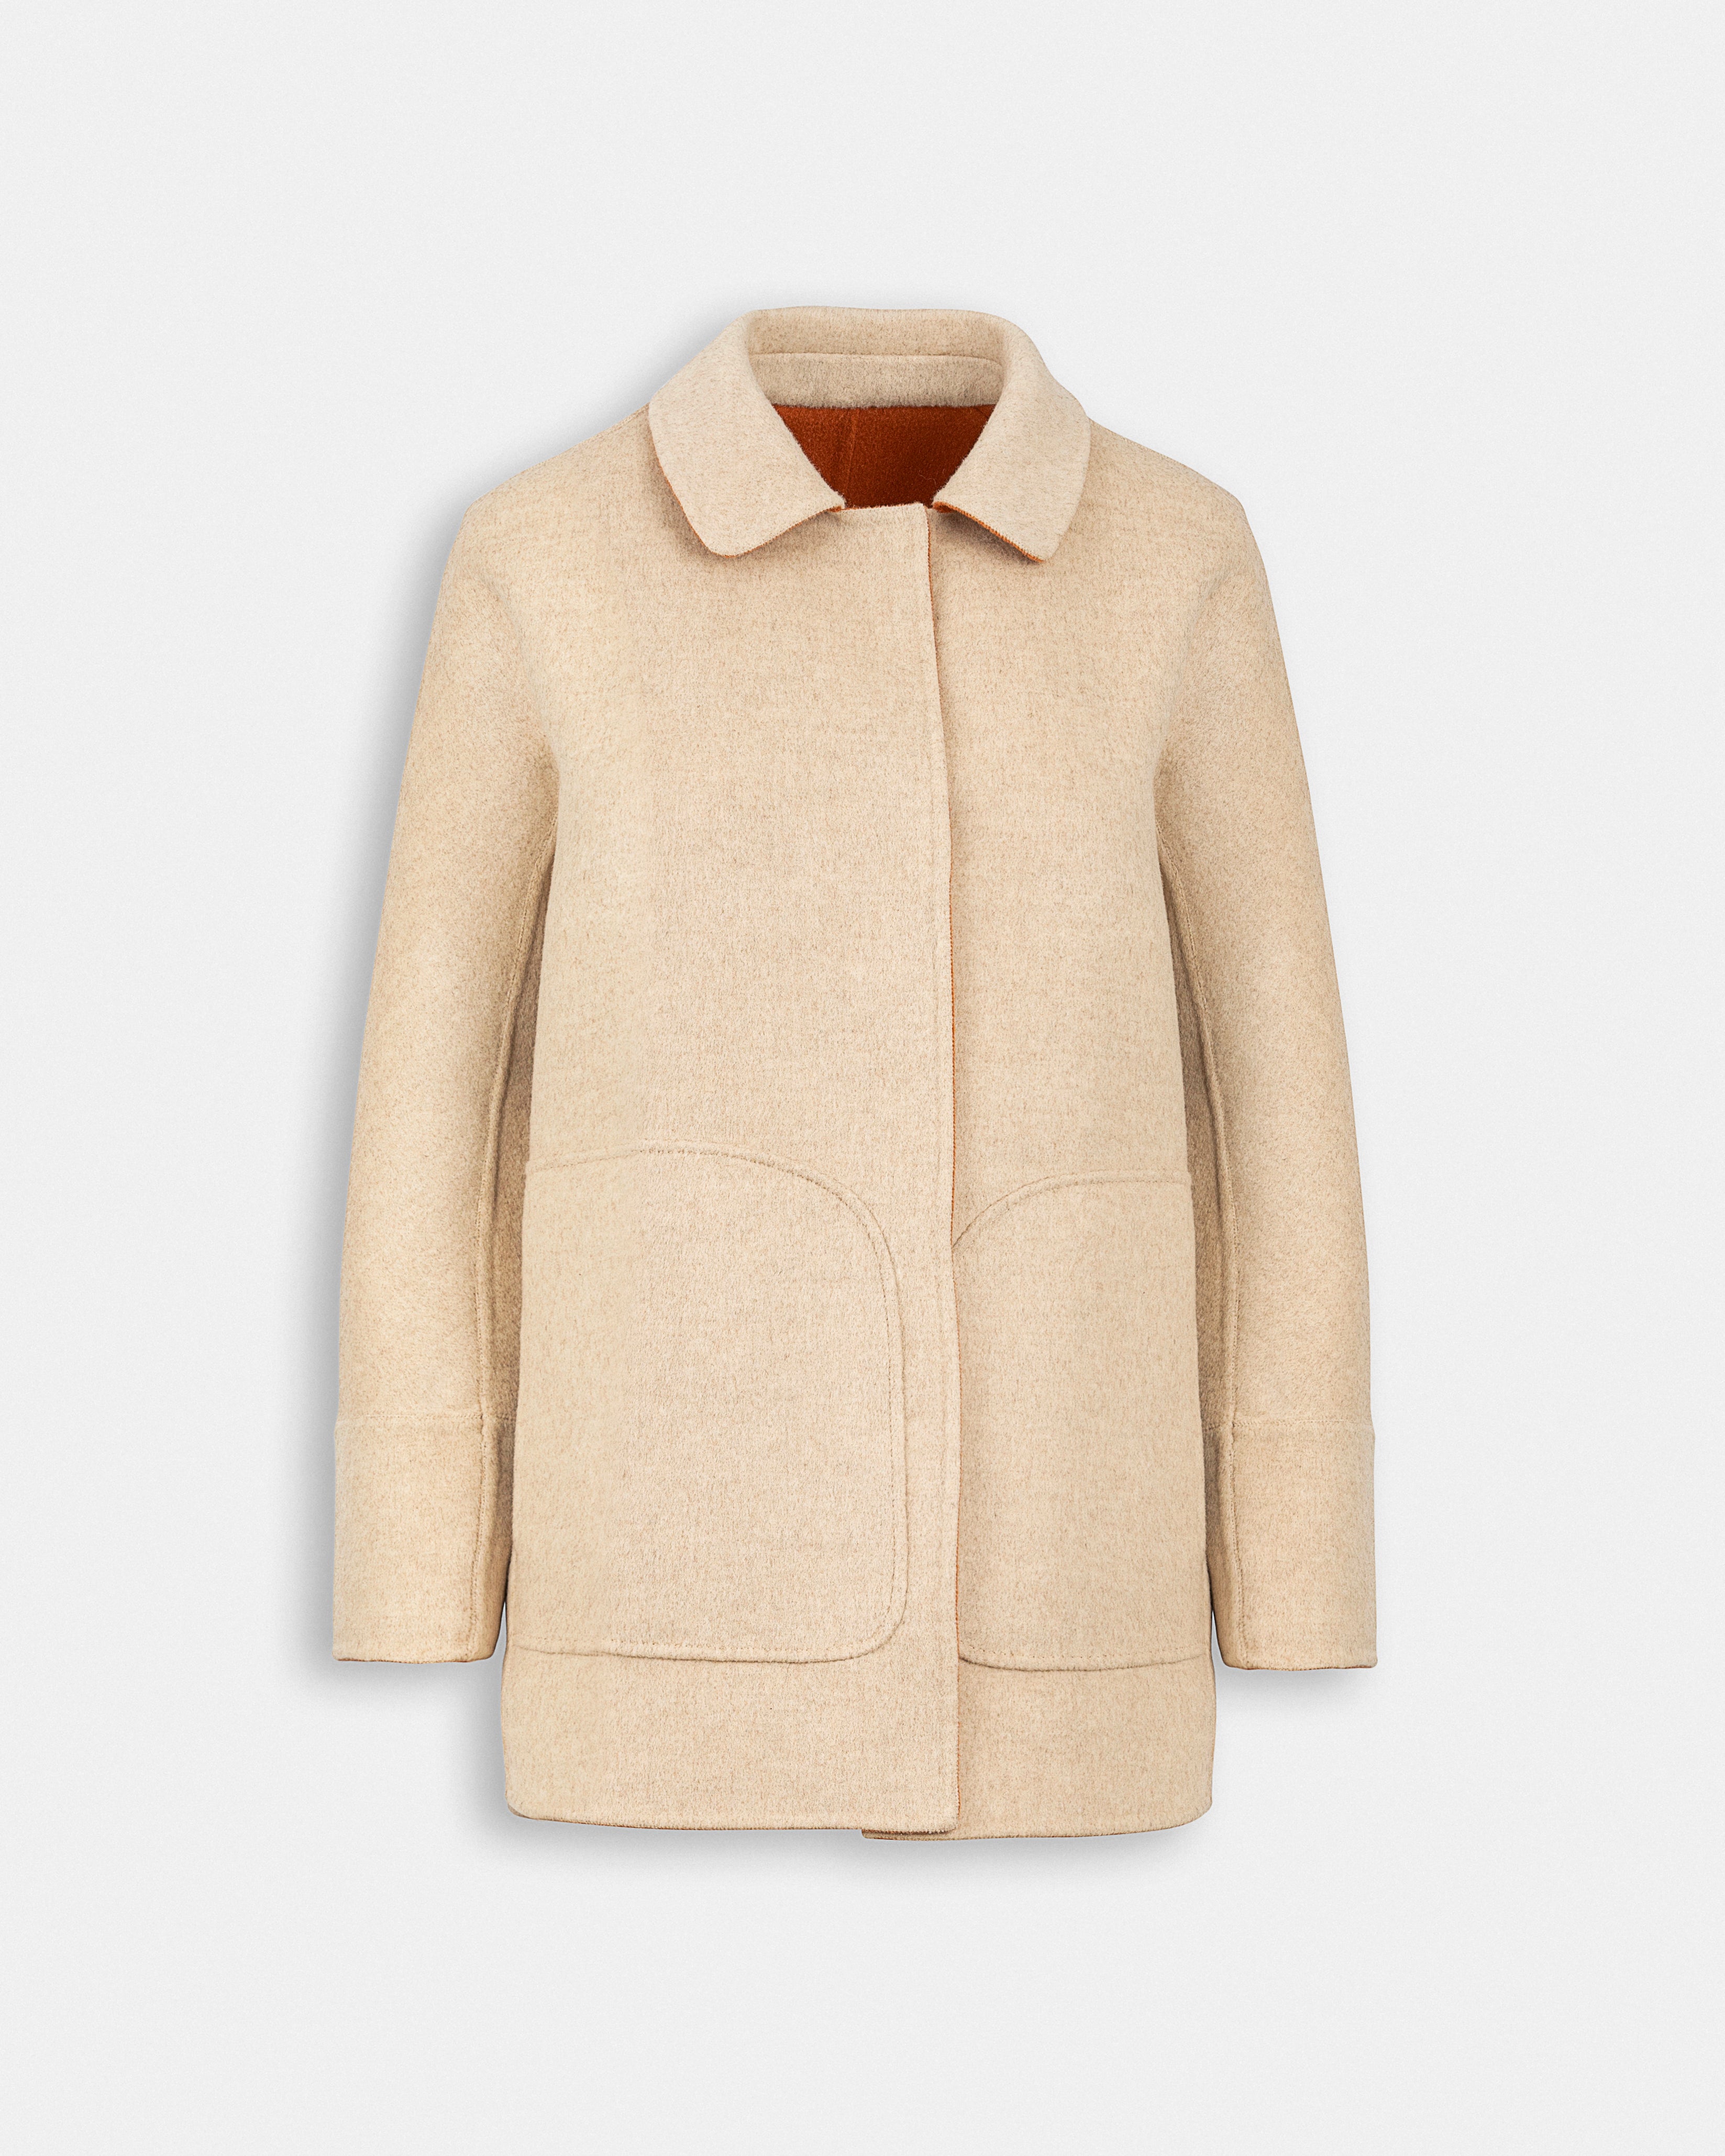 Cashmere Short Coat is reversible, crafted from two tone double-faced fabric, suitable to wear anytime and anywhere. 